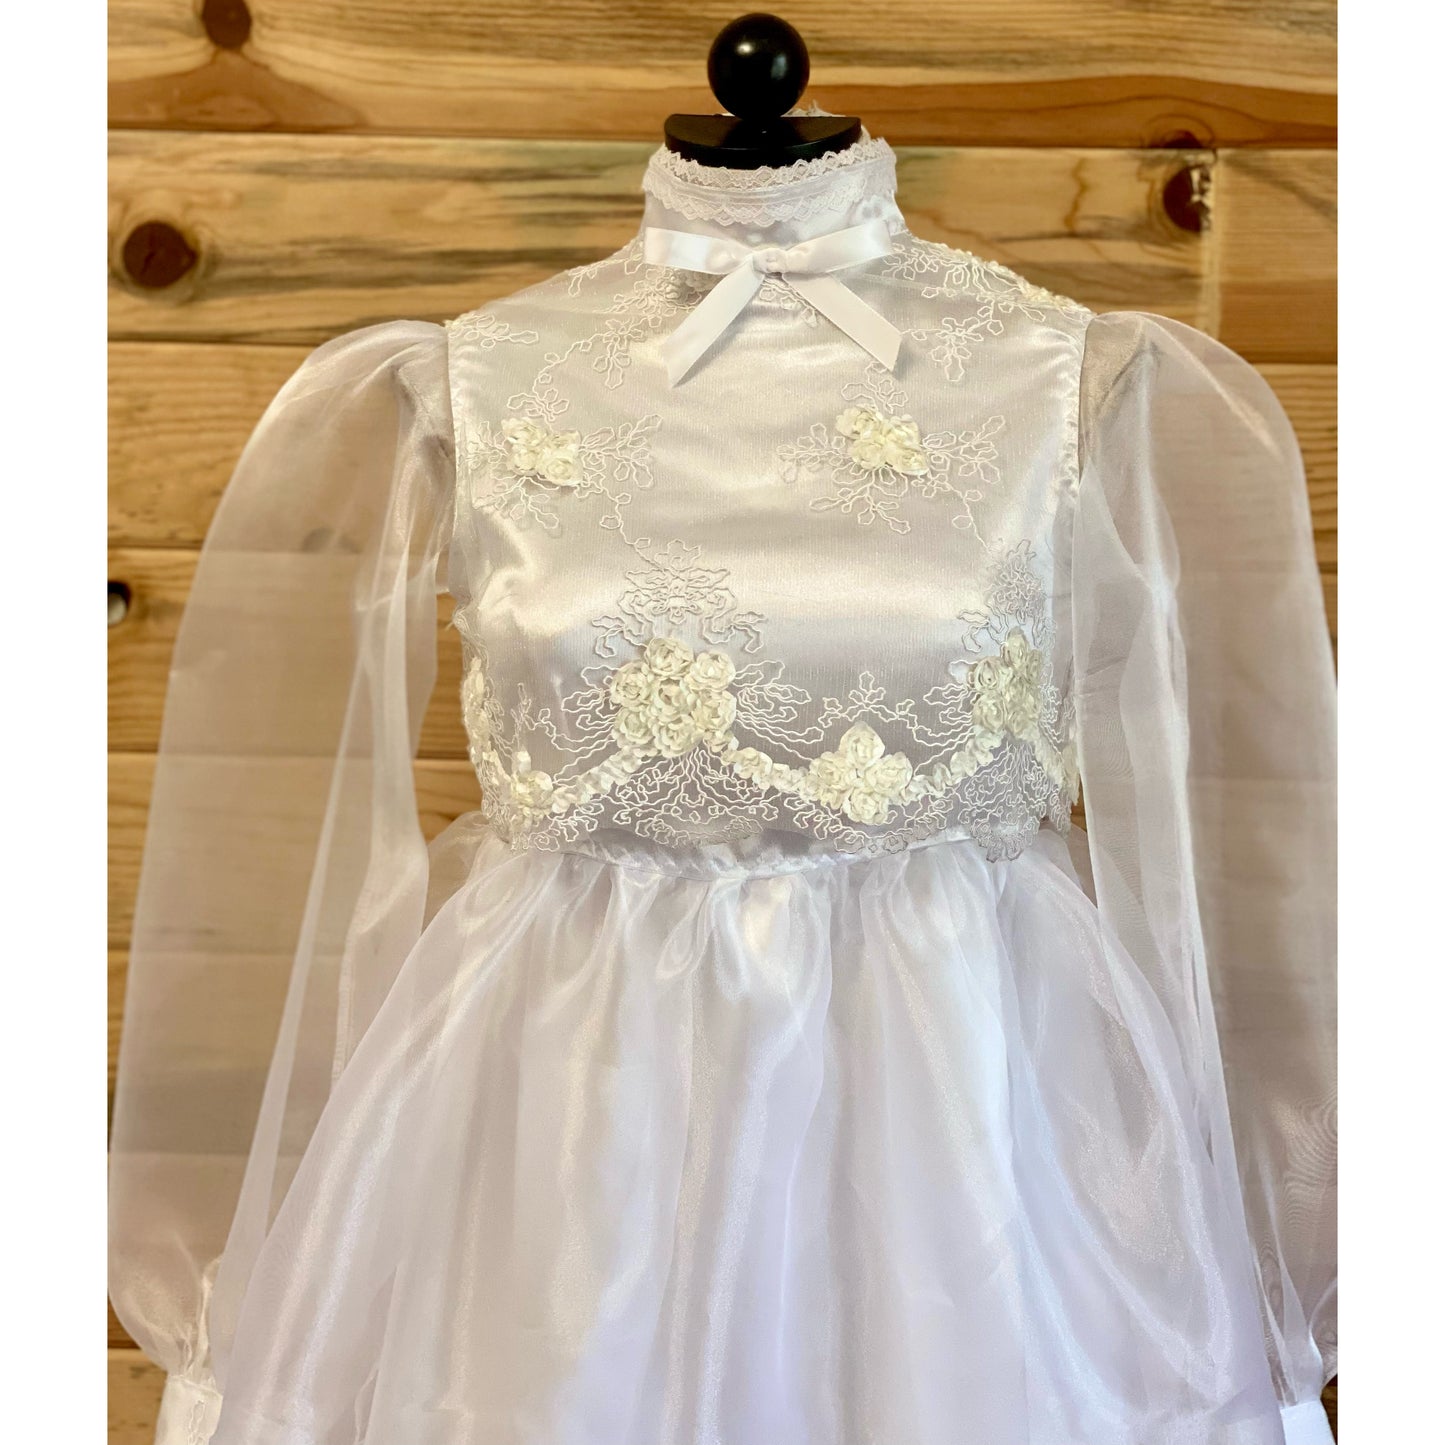 The Communion Dress in White